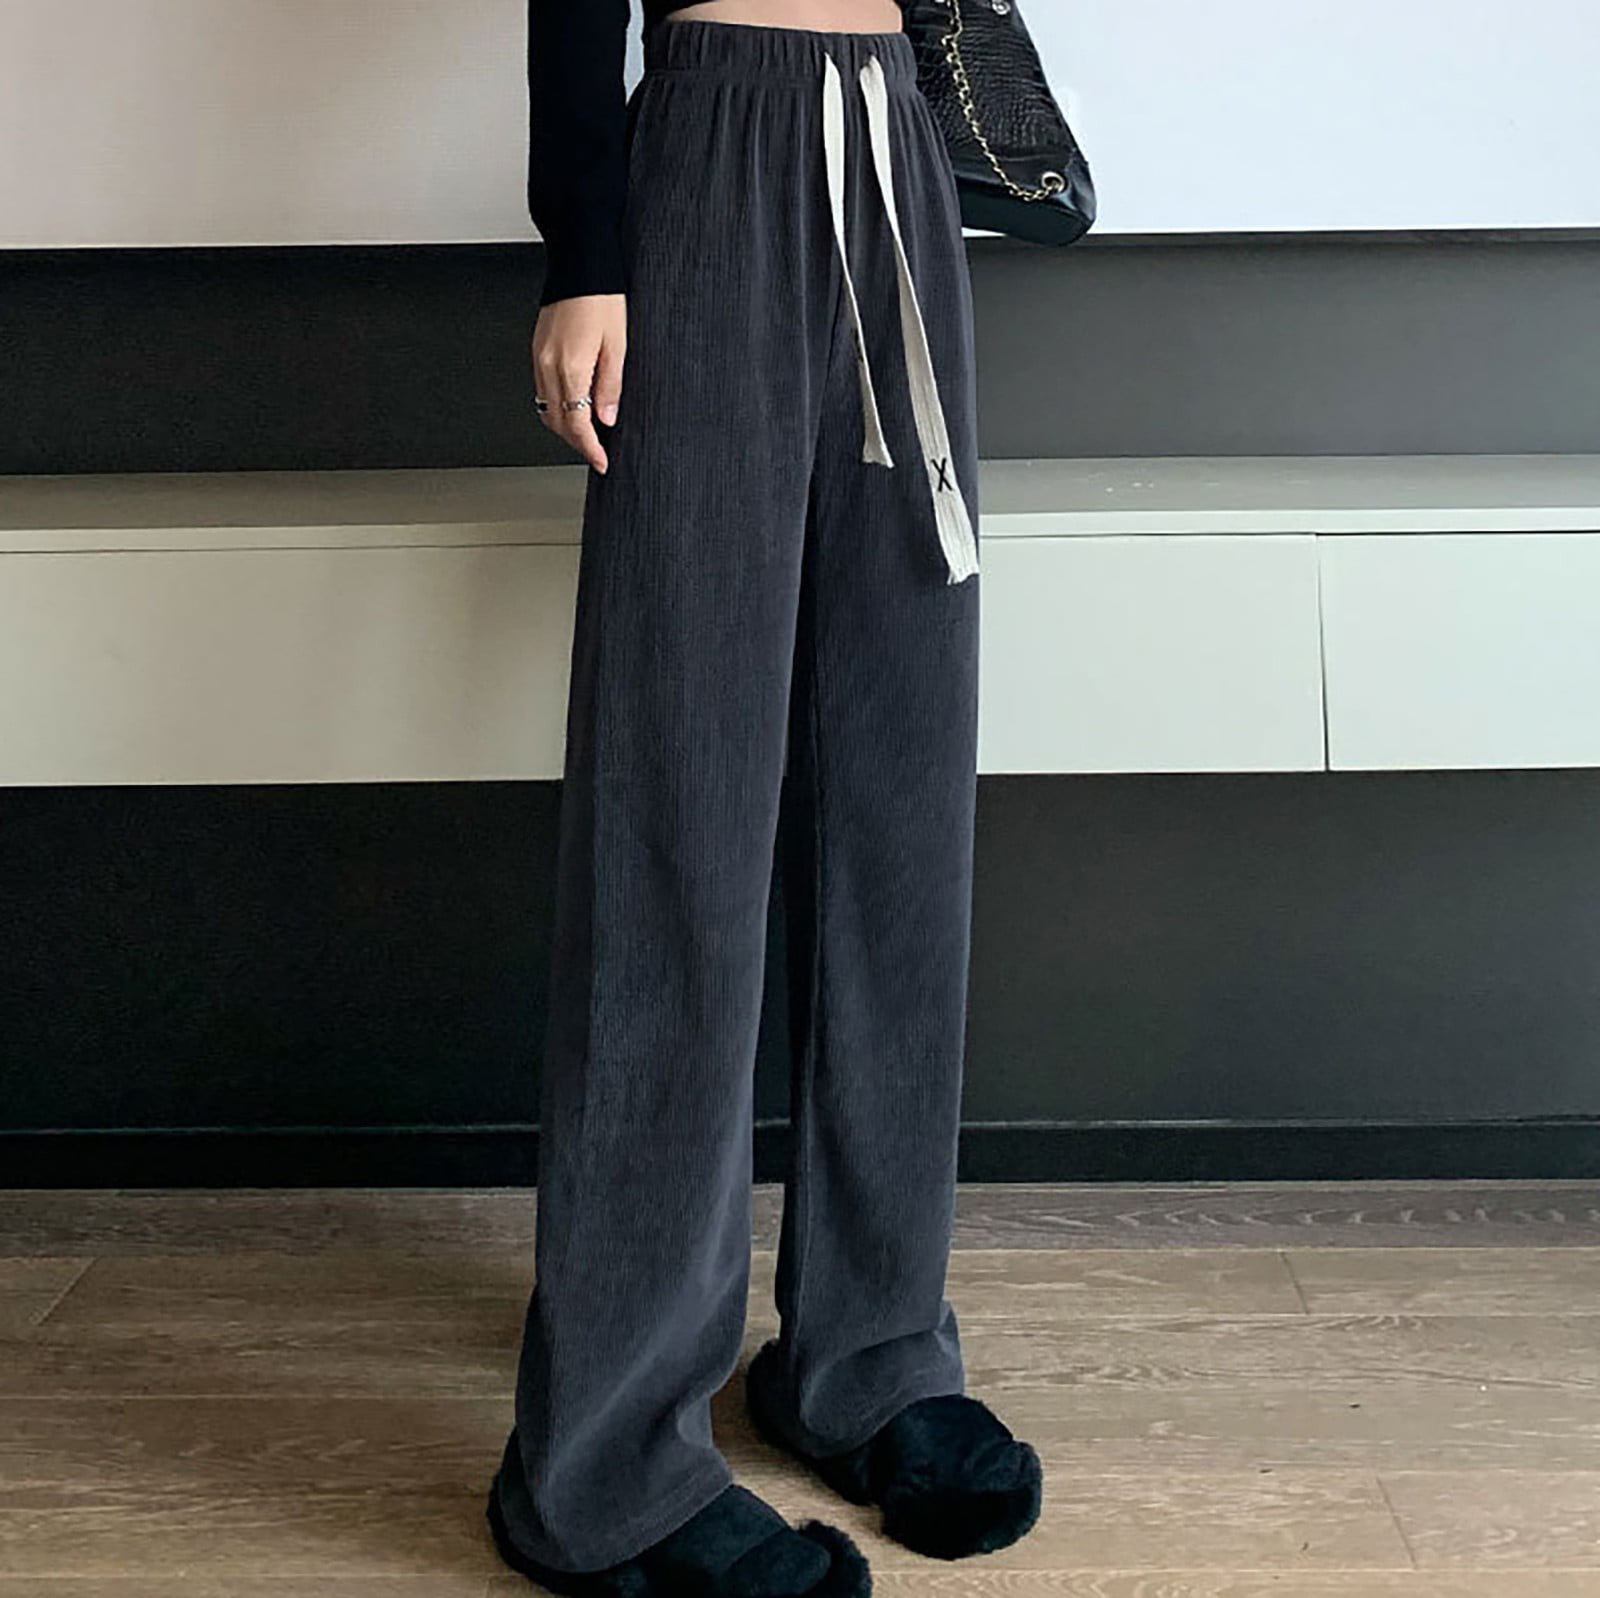 Strungten Women's Fashion All-match Casual Sports Thin And High Solid Color  Wide-leg Trousers wide leg pants for women 